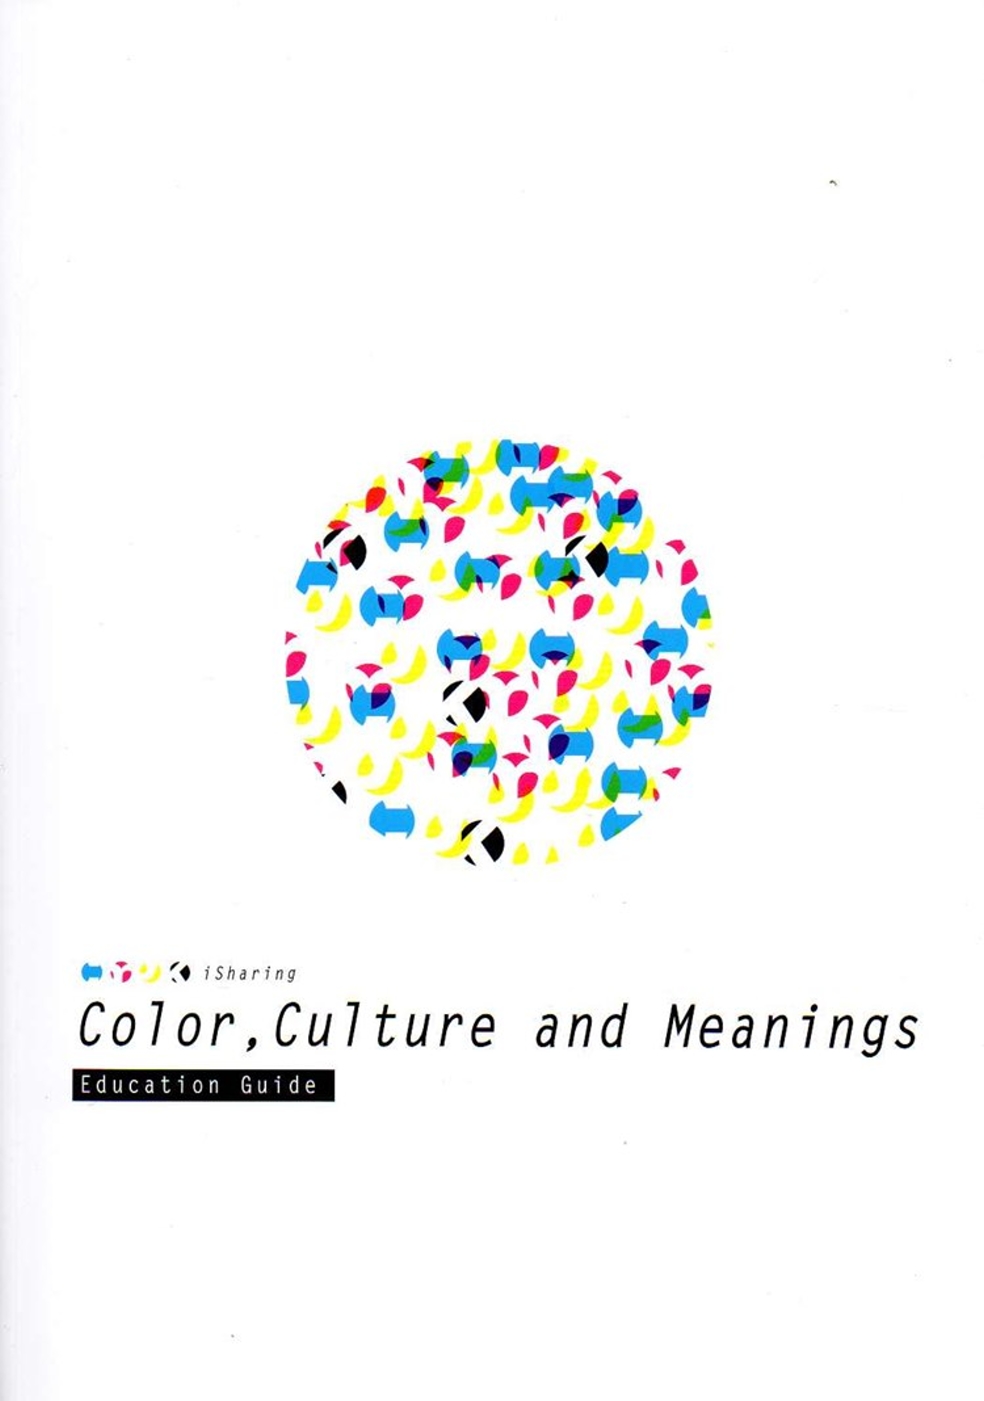 Color, Culture and Meanings：Education Guide「顏色的基因—色彩與文化」教育學習手冊(英文版)